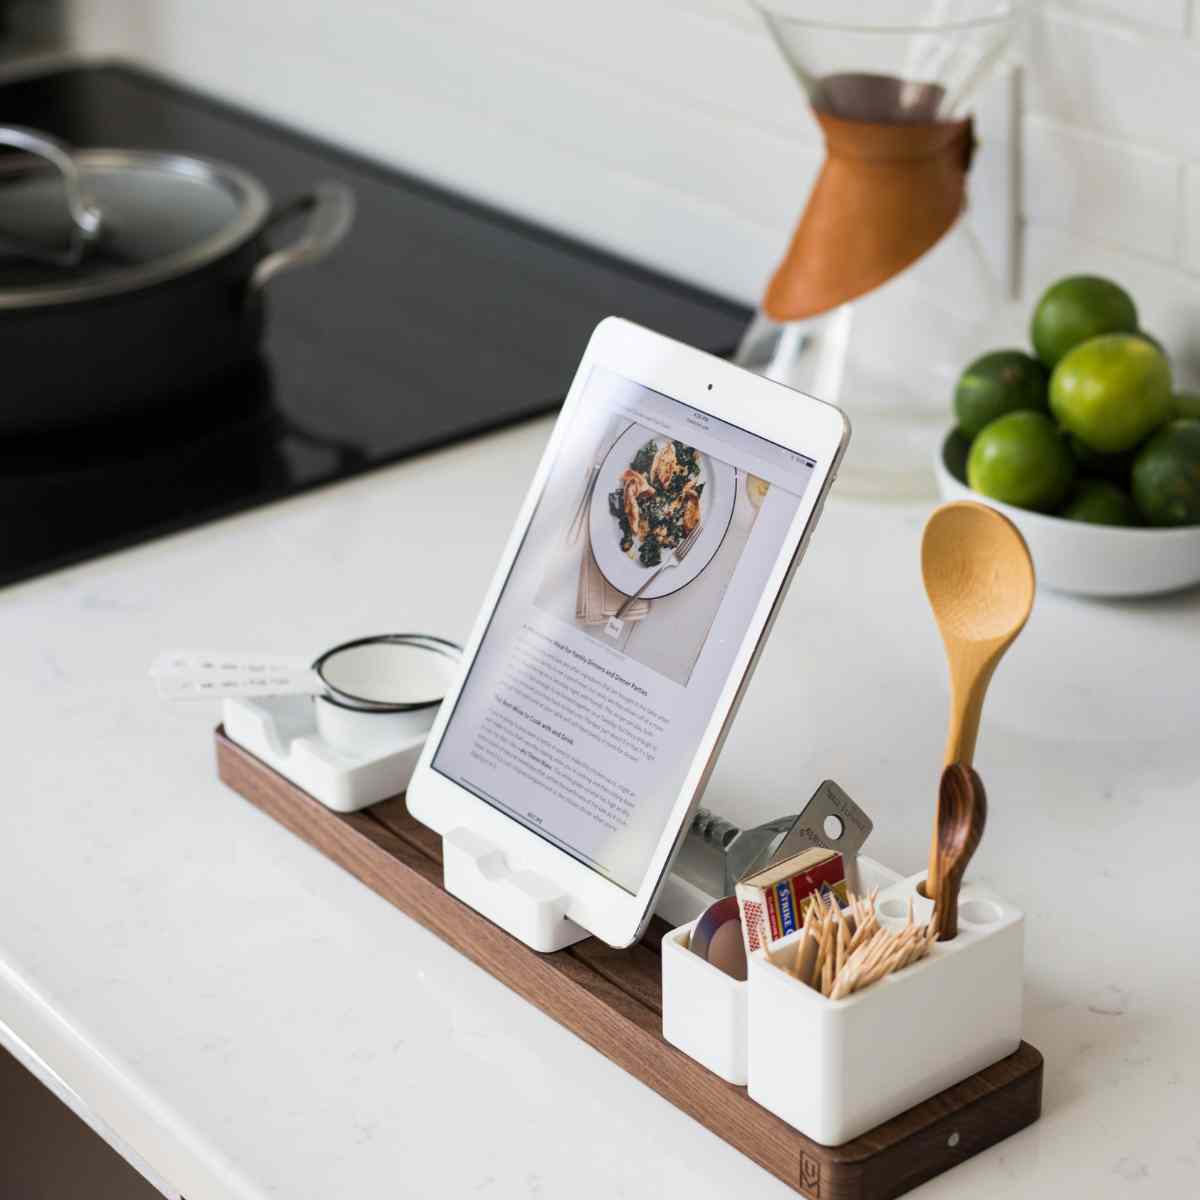 An ipad on the kitchen counter is ready for cooking.